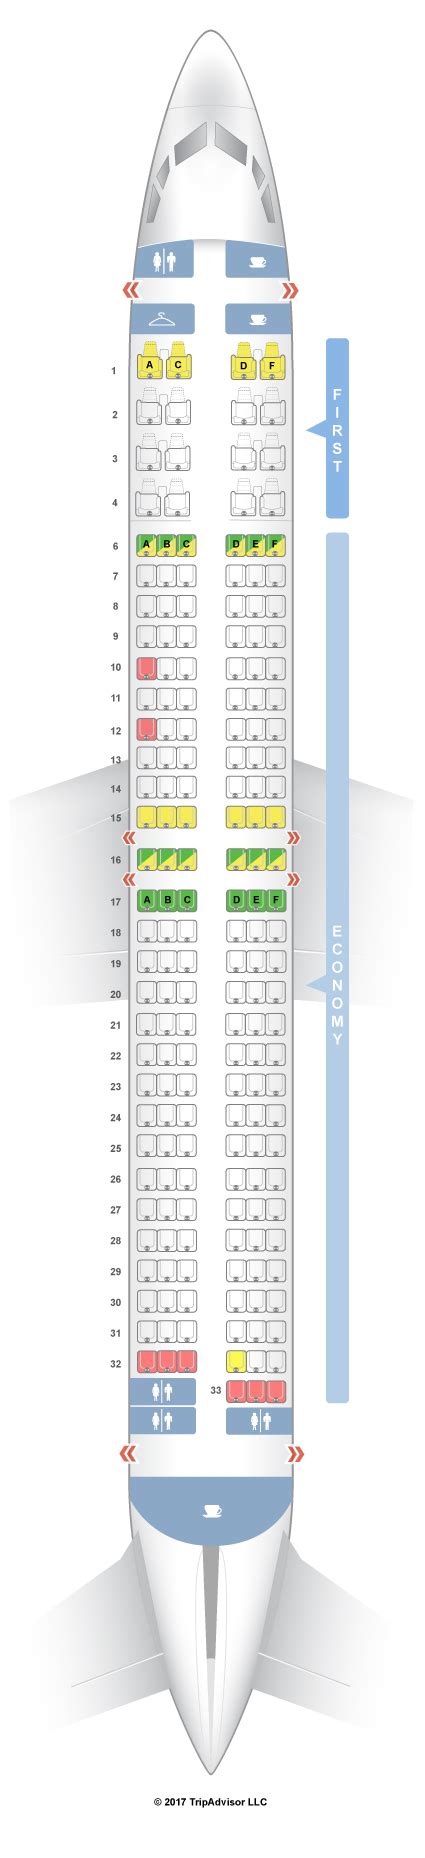 737 900 alaska seat map. Until the transformation is complete you might travel on an aircraft with the Virgin America livery and interiors. Alaska Airlines operates three versions of the A320 aircraft. This version of the A320 aircraft operates with 149 seating capacity, 8 seats in First Class, 18 seats in Premium Class and 123 seats in Economy Class. 